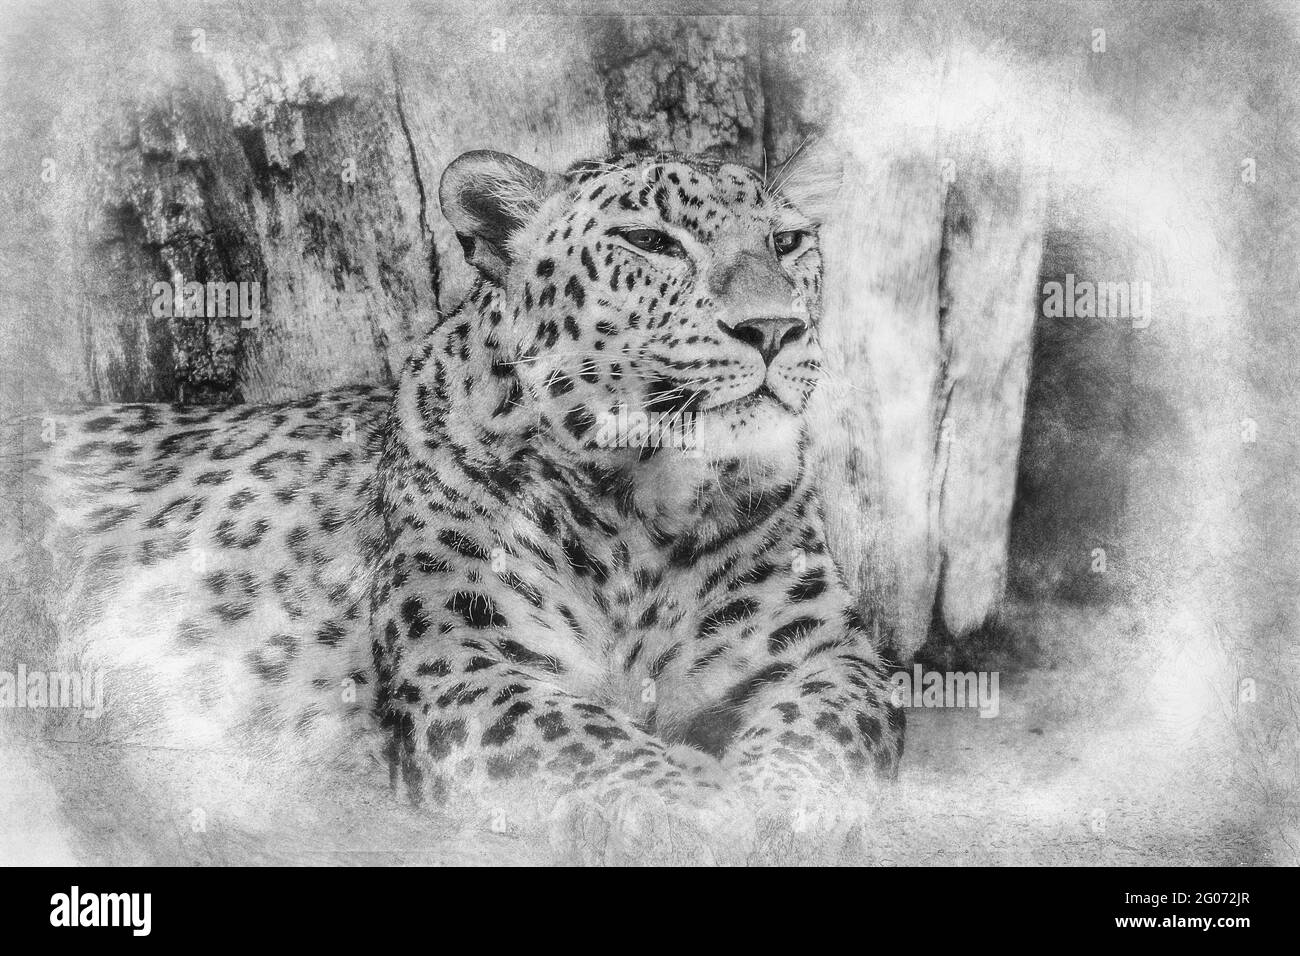 Wild, Powerful leopard resting, wildlife mammal with spot skin black and white drawing Stock Photo